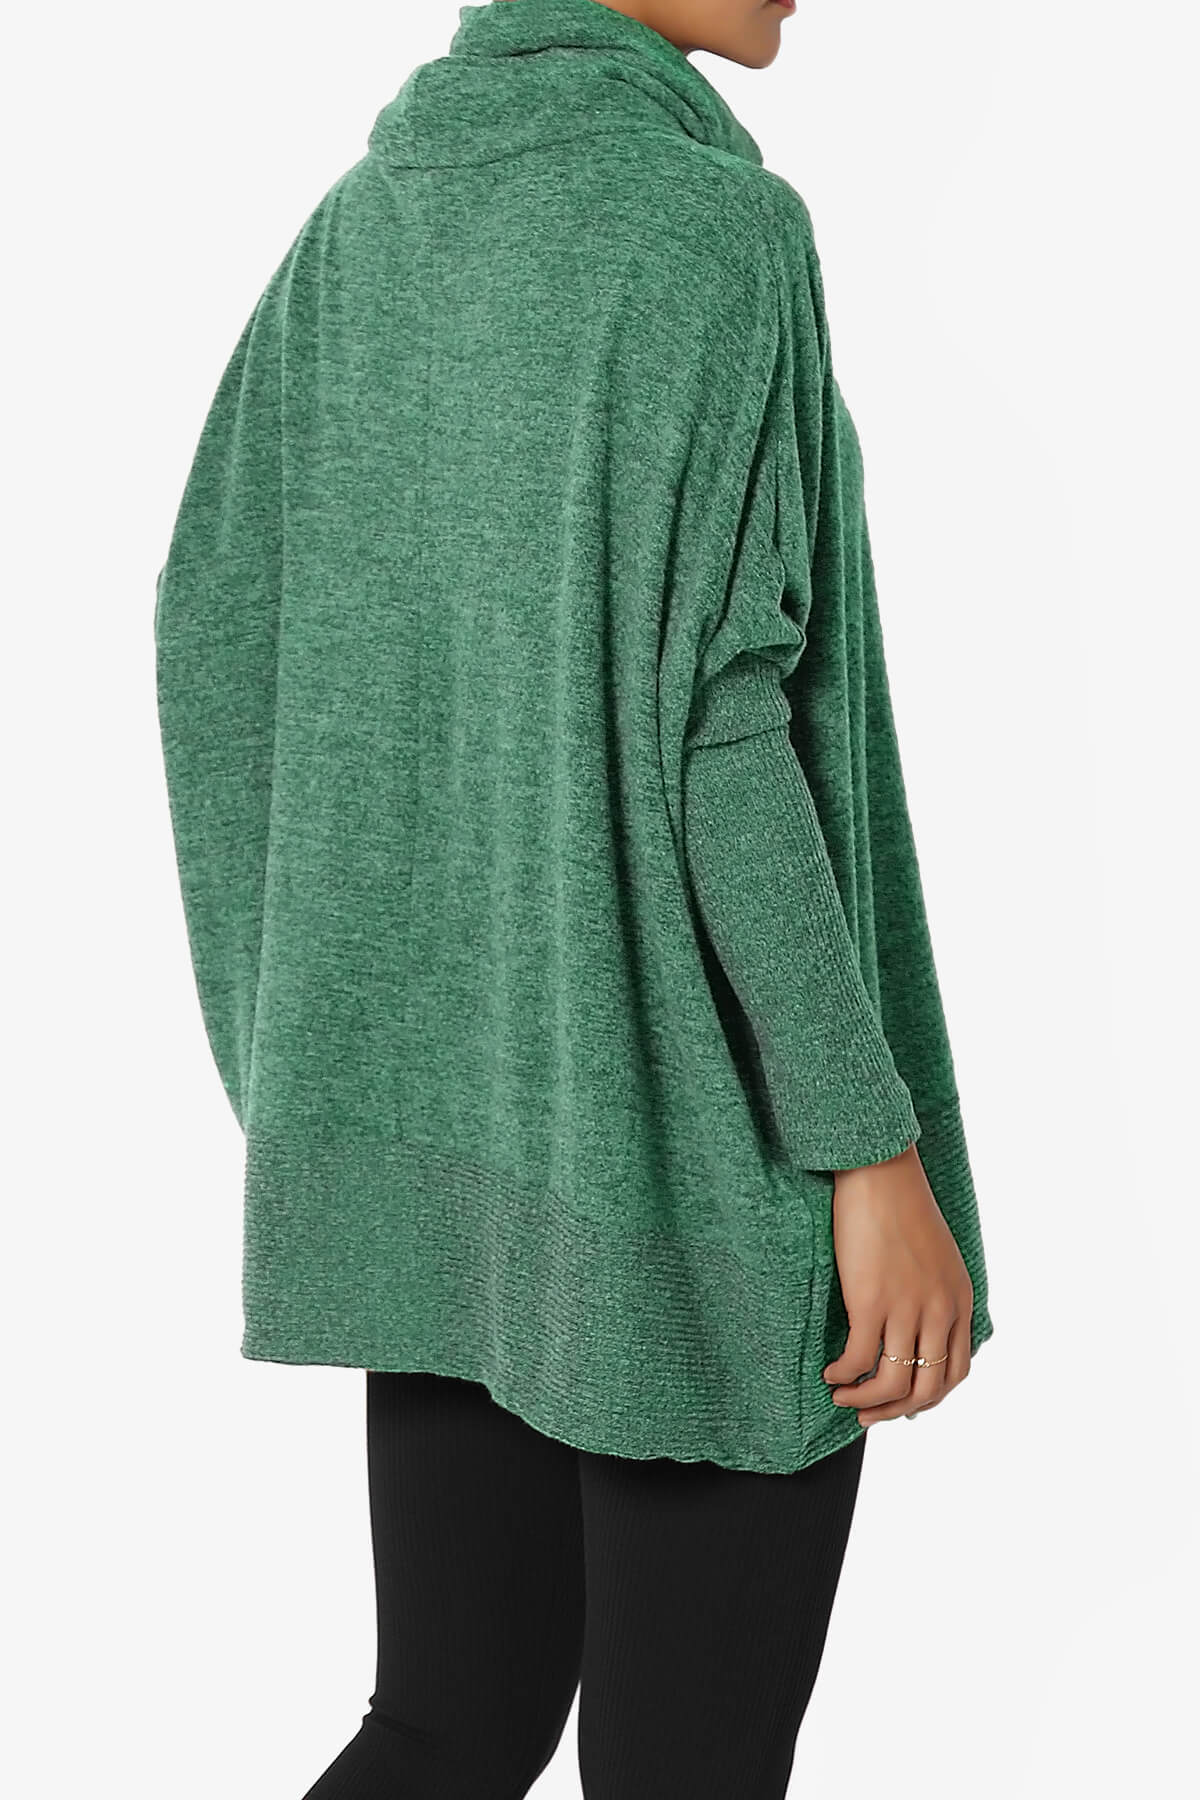 Load image into Gallery viewer, Barclay Cowl Neck Melange Knit Oversized Sweater DARK GREEN_4
